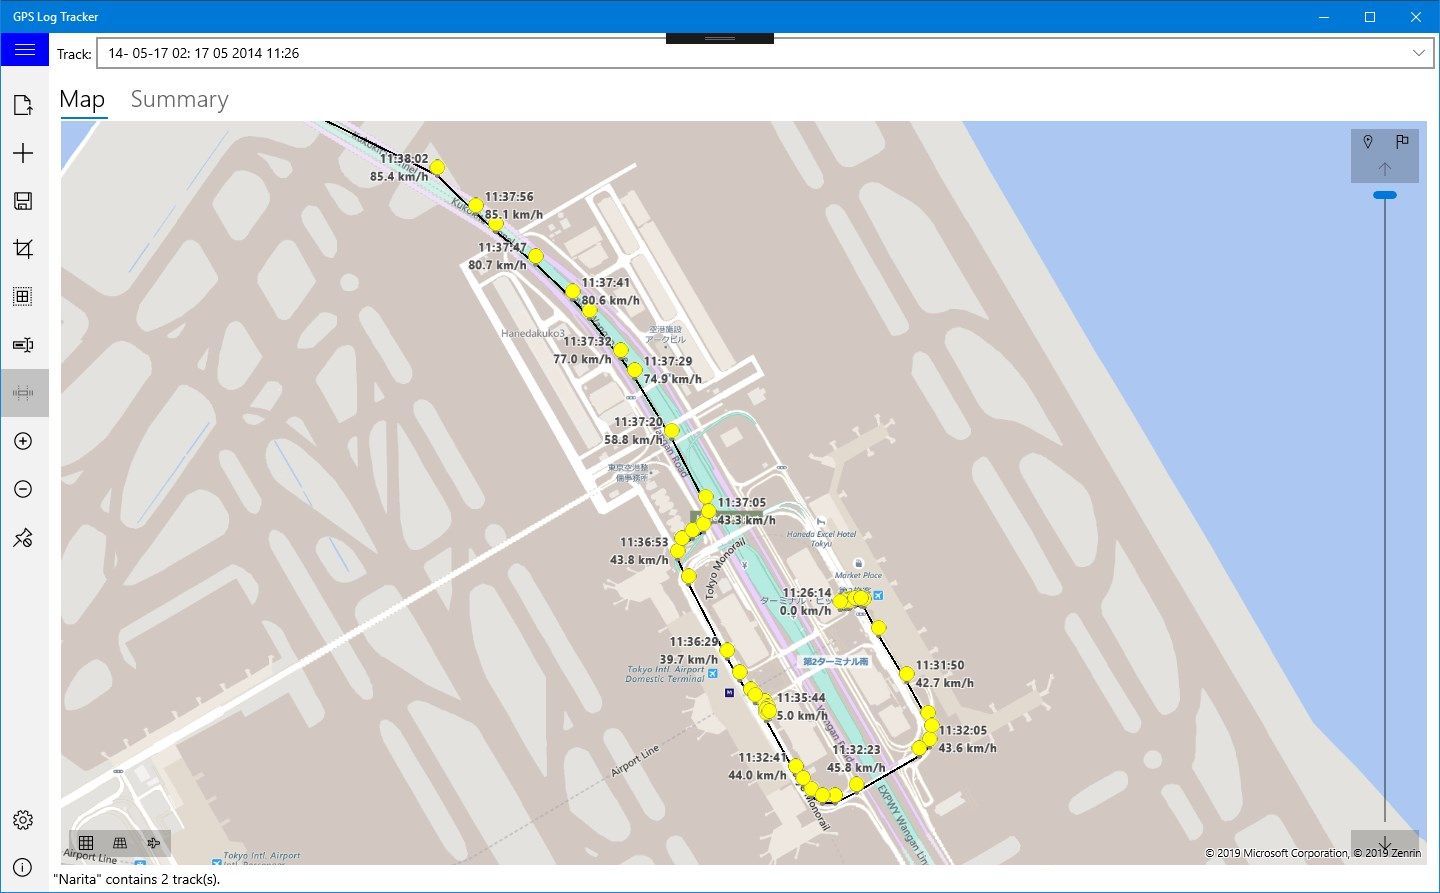 Route information acquired by Garmin GPS can be displayed on the map